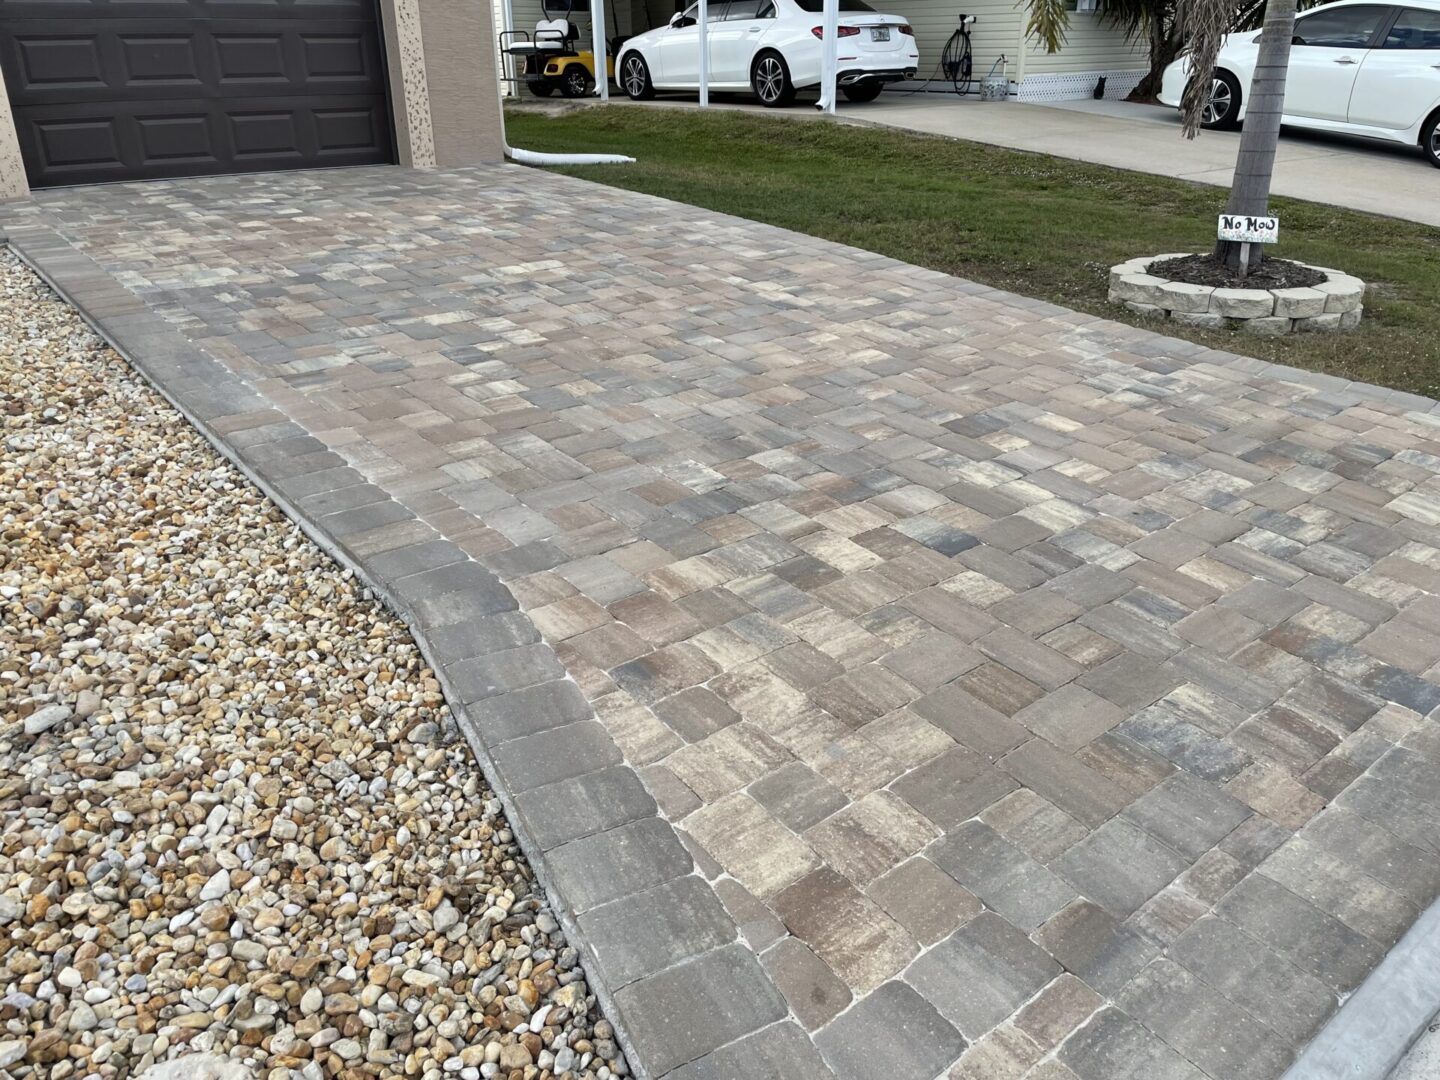 A driveway paved with interlocking stone tiles is bordered by pebbles on the left and a small patch of grass on the right, leading up to a closed garage door. Two cars are parked near a house in the background.